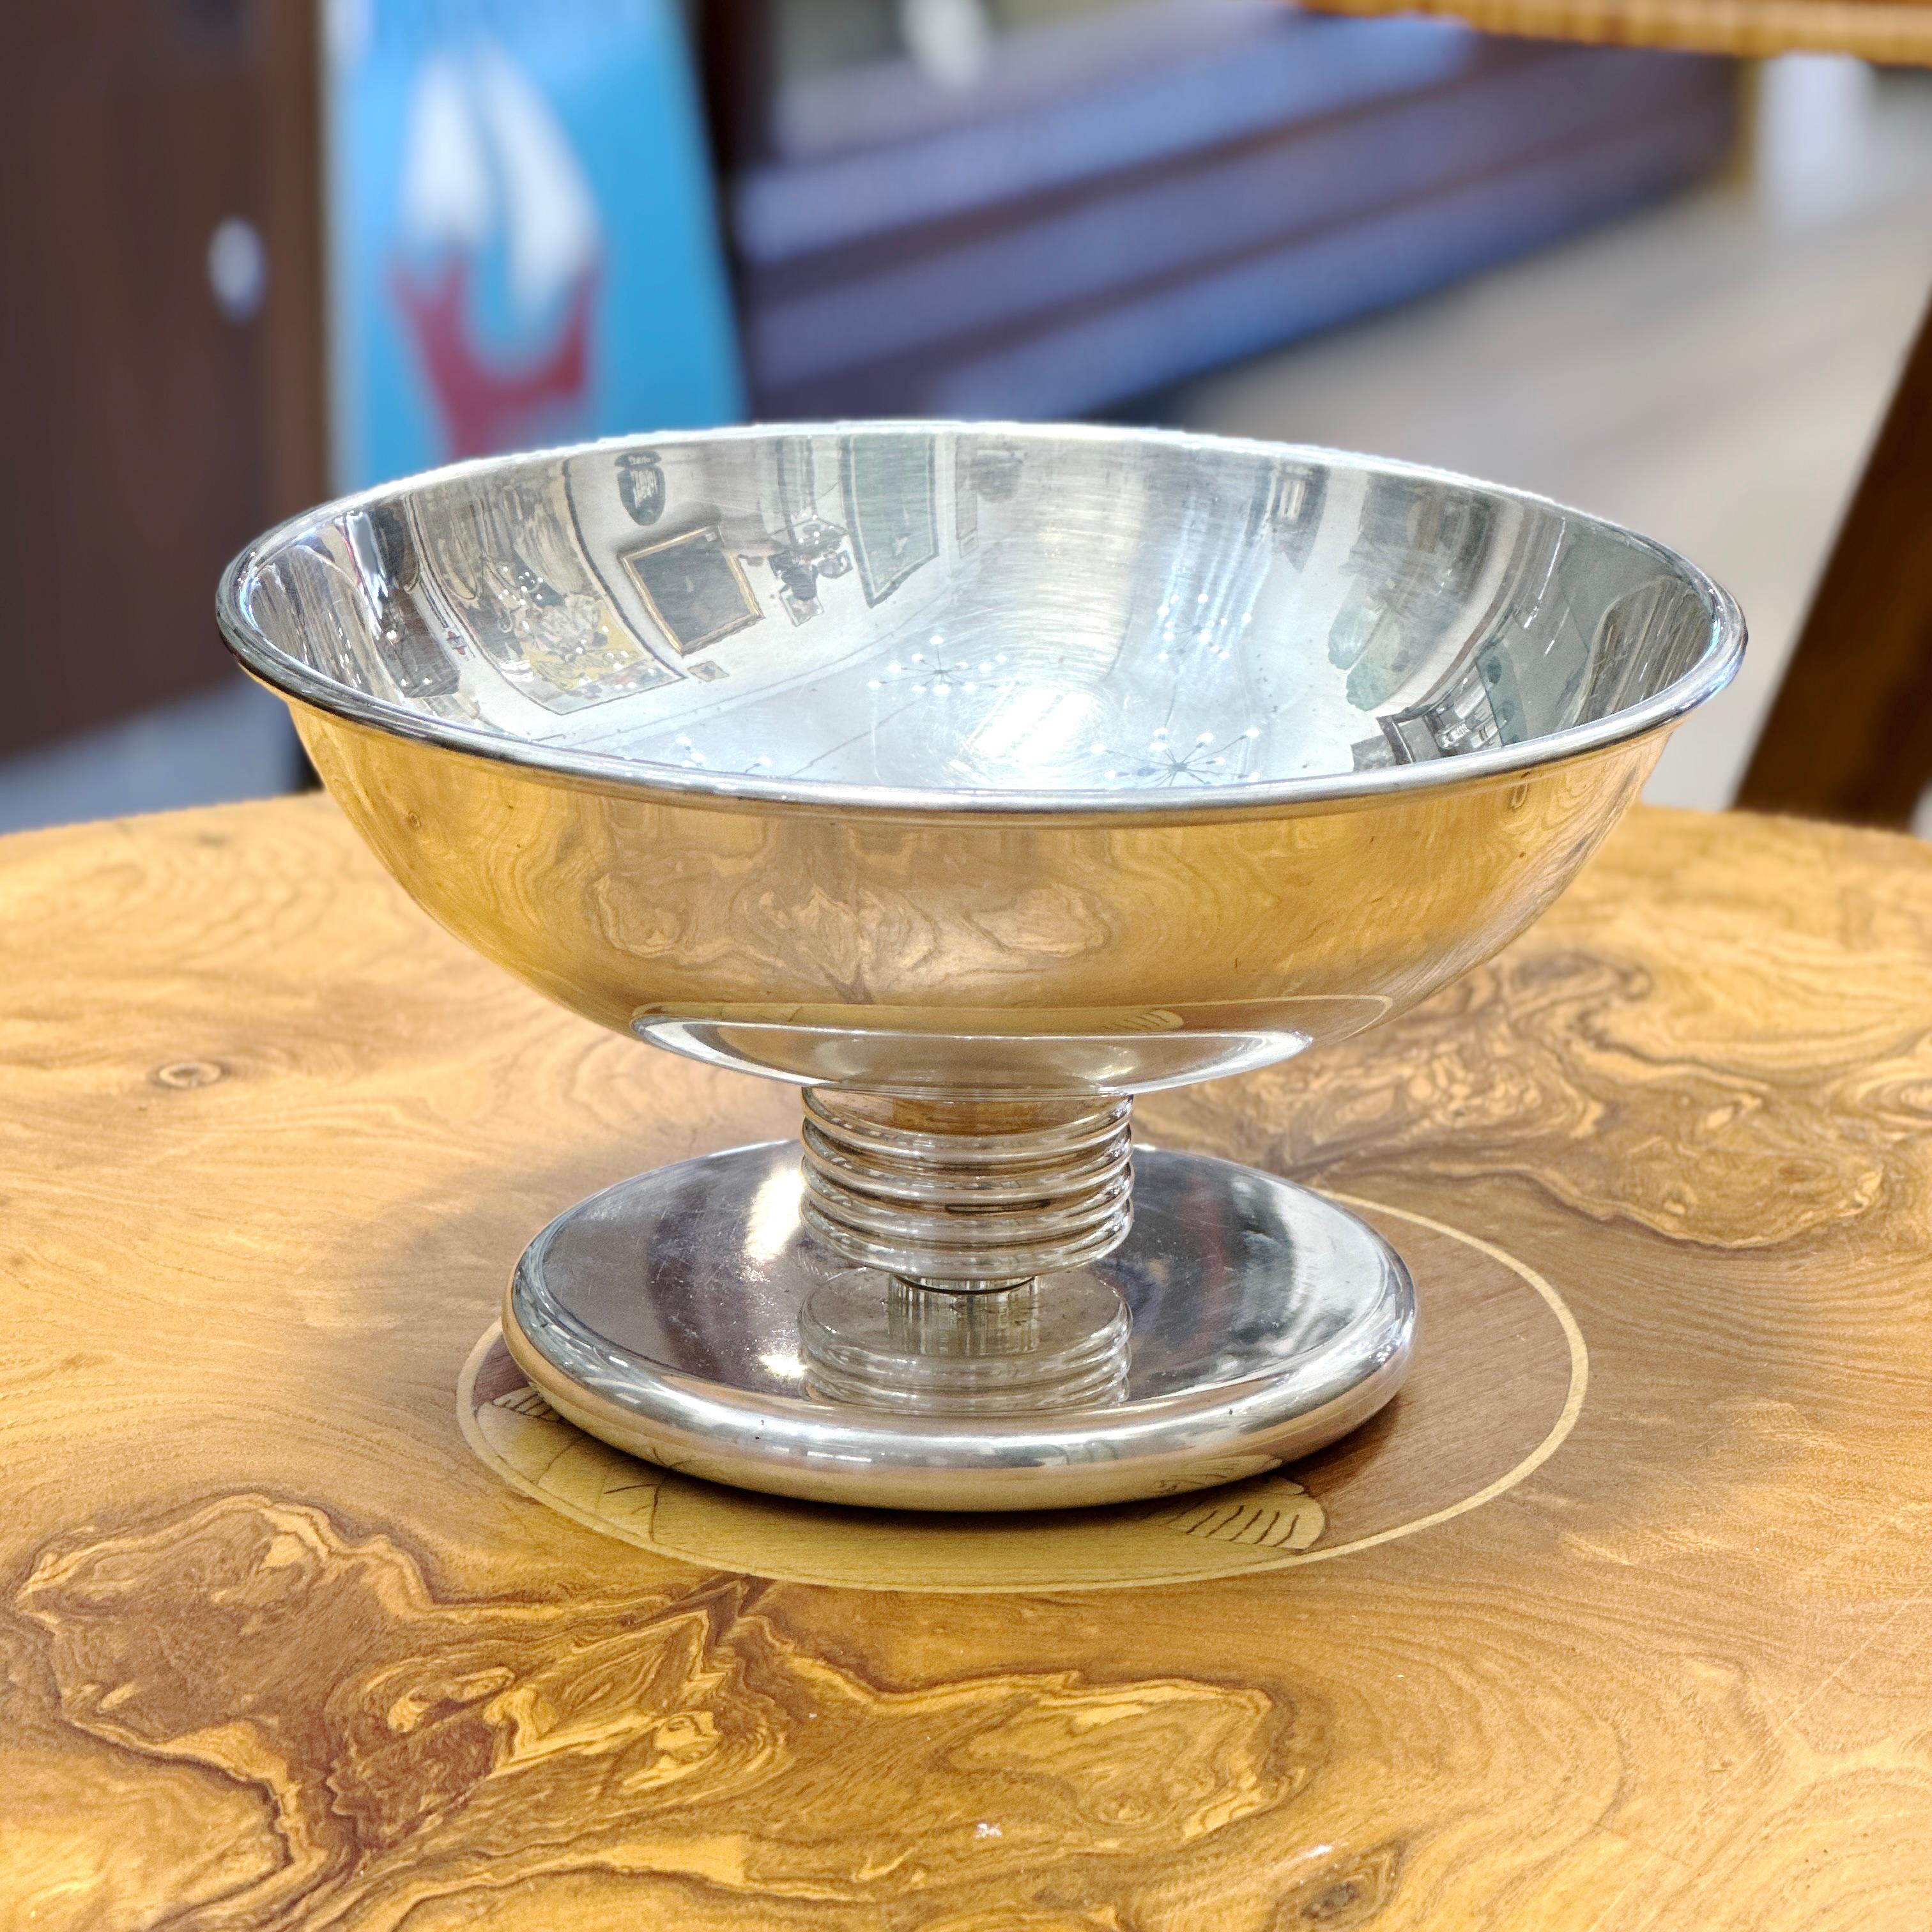 Here is a beautiful Vintage Christian Dior Silver Plated Pedestal Bowl. This lovely bowl features a deco style design and is stamped on the base with the makers mark. Made in France, circa approx. 1960s. Overall good condition for its age with wear